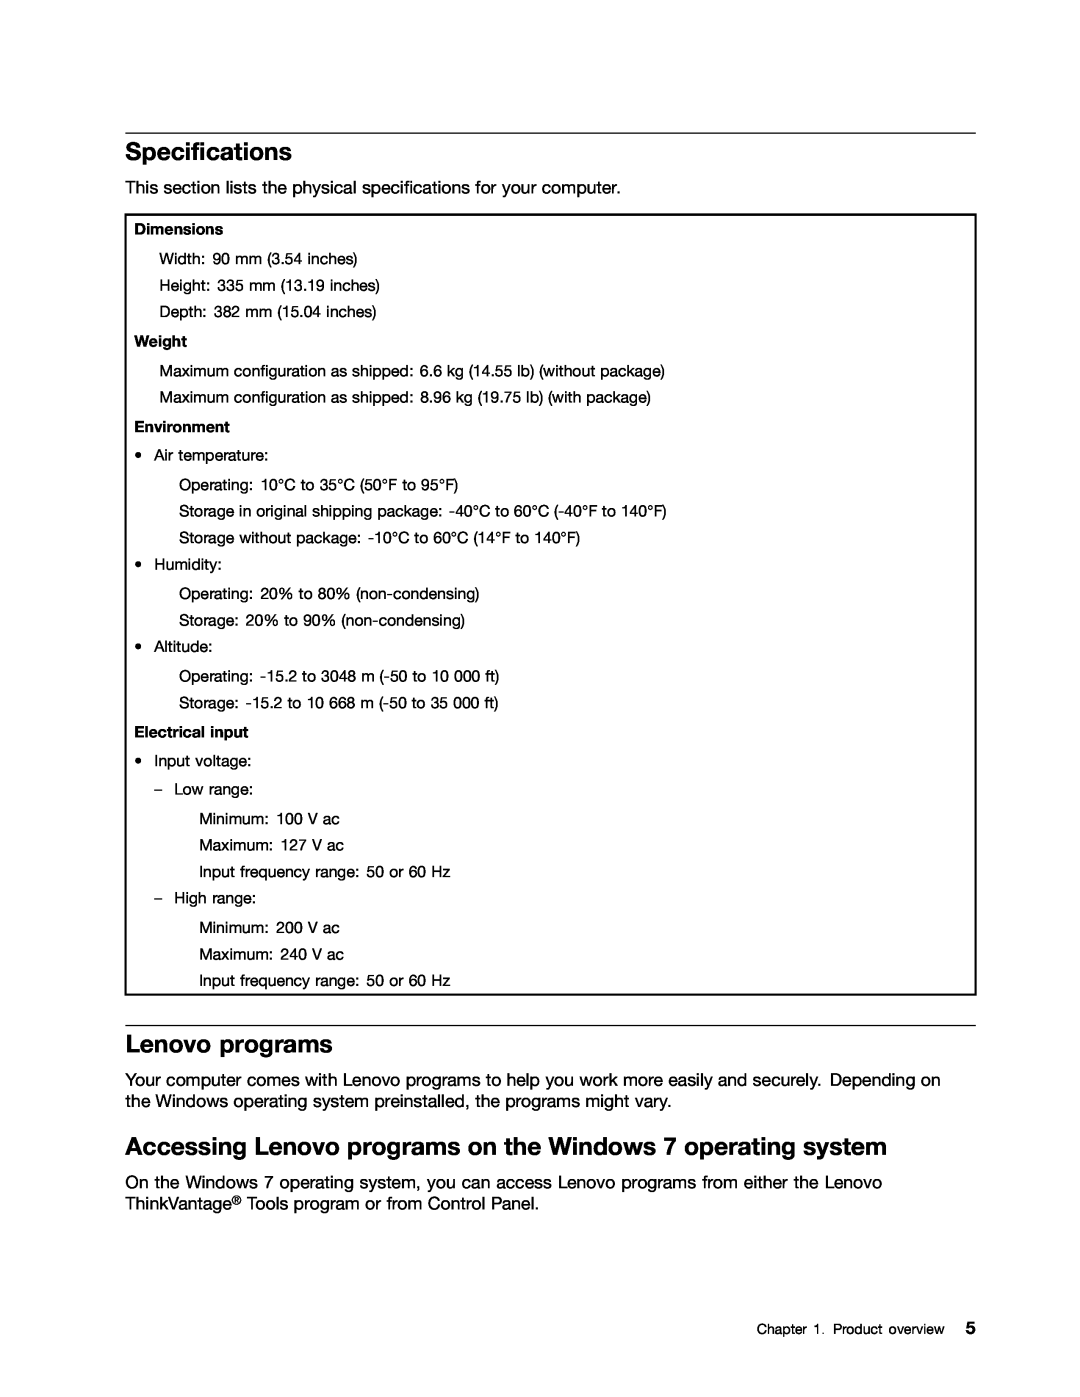 Lenovo M73 manual Specifications, Accessing Lenovo programs on the Windows 7 operating system 